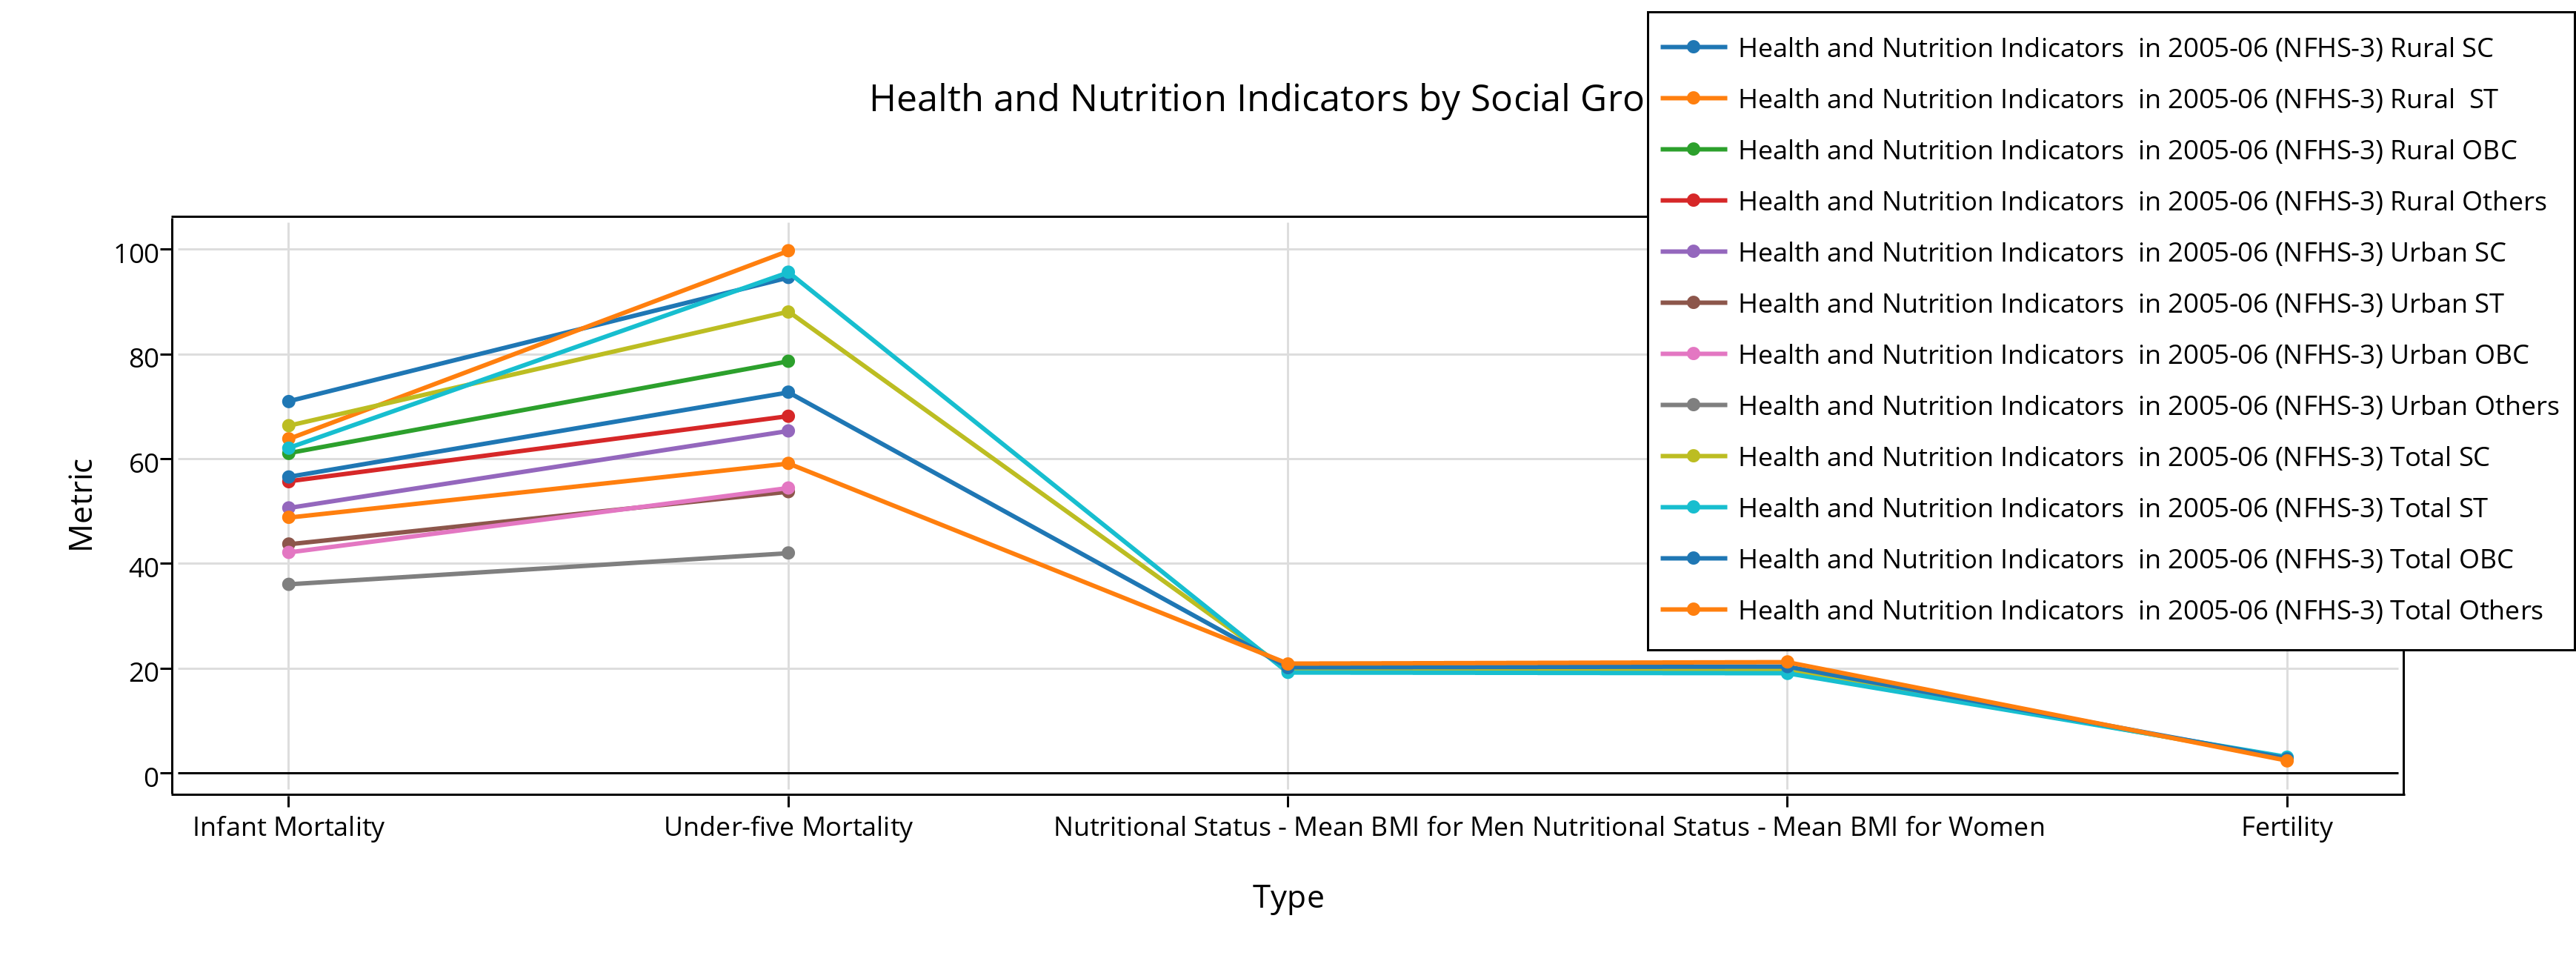 health and nutrition indicators by social groups